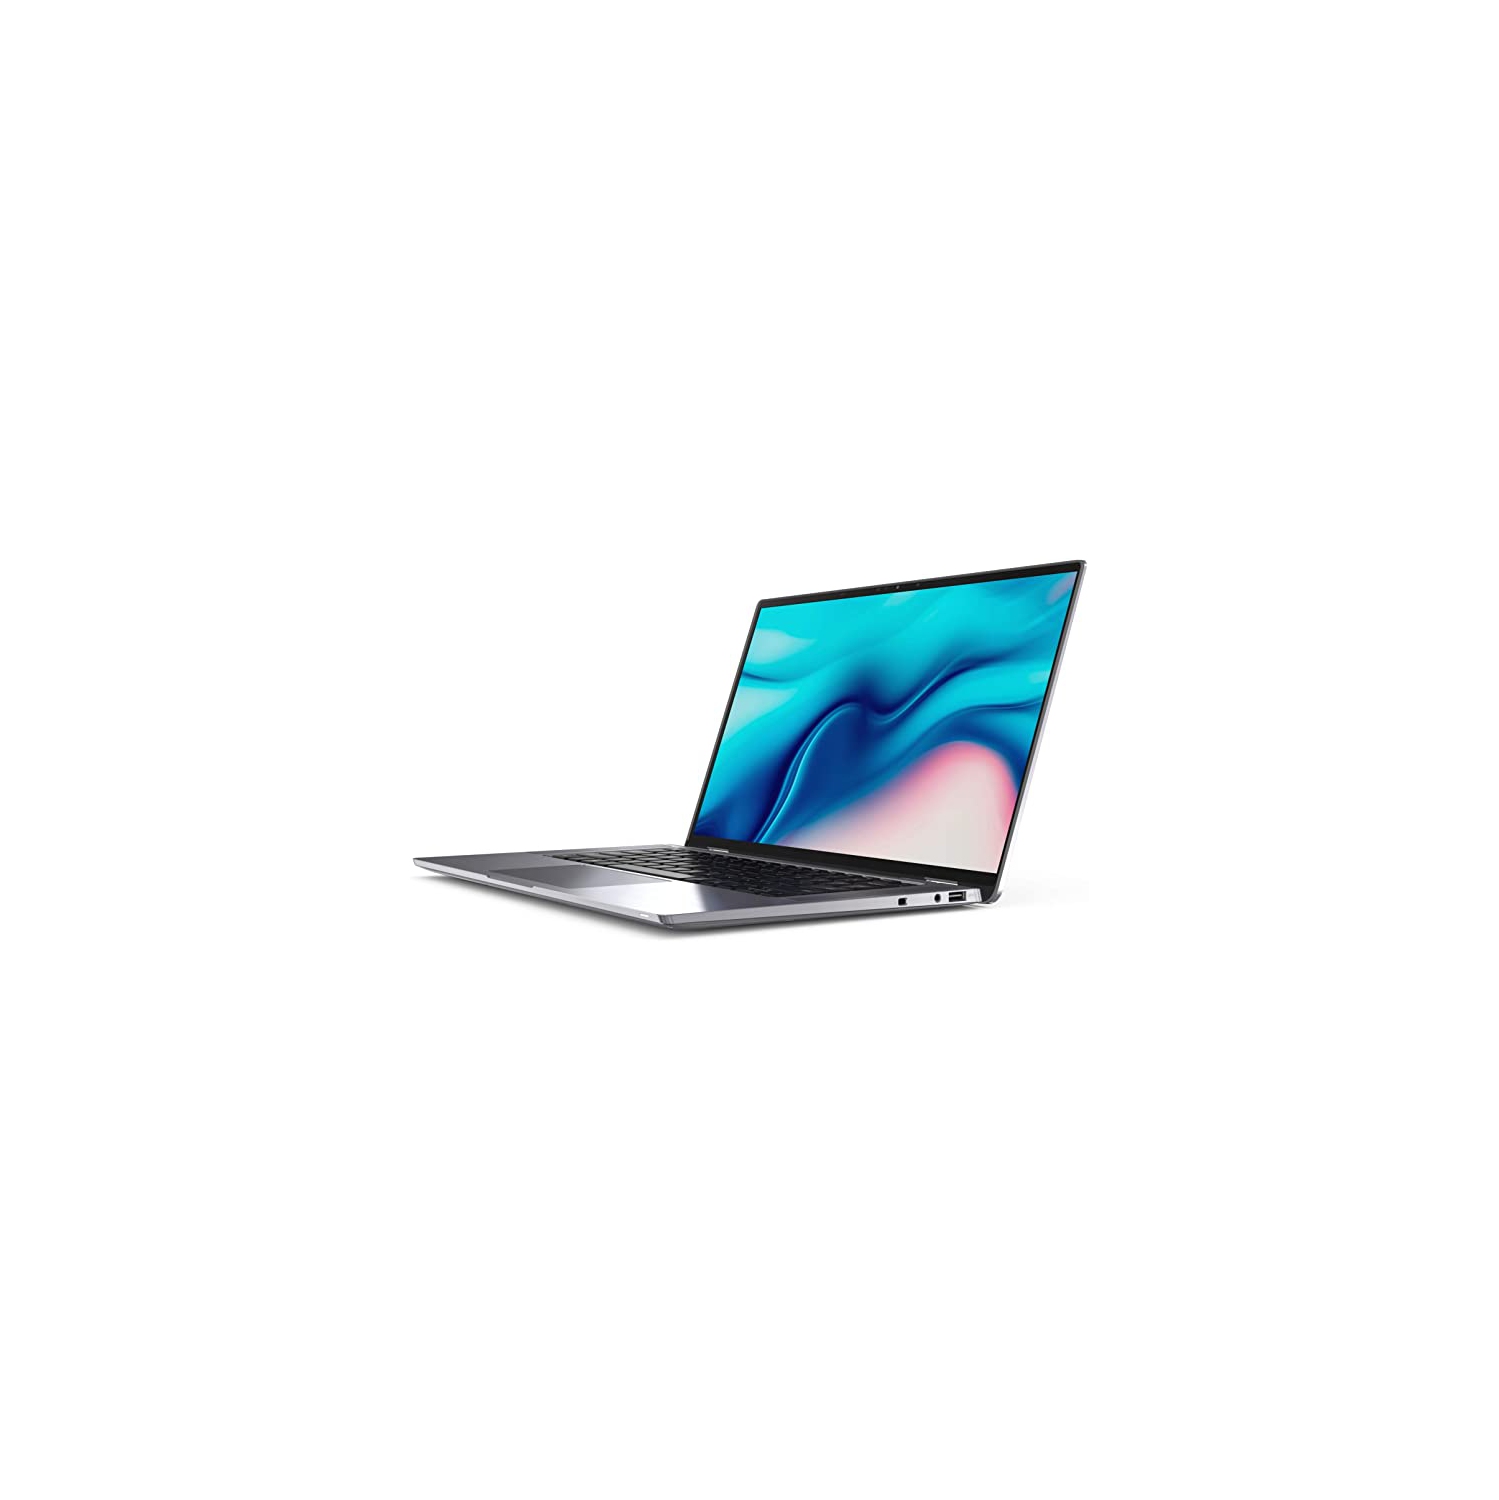 Refurbished (Excellent) - Dell Latitude 9000 9510 Laptop (2020) | 15.6" FHD | Core i5 - 512GB SSD - 16GB RAM | 4 Cores @ 4.4 GHz - 10th Gen CPU Certified Refurbished